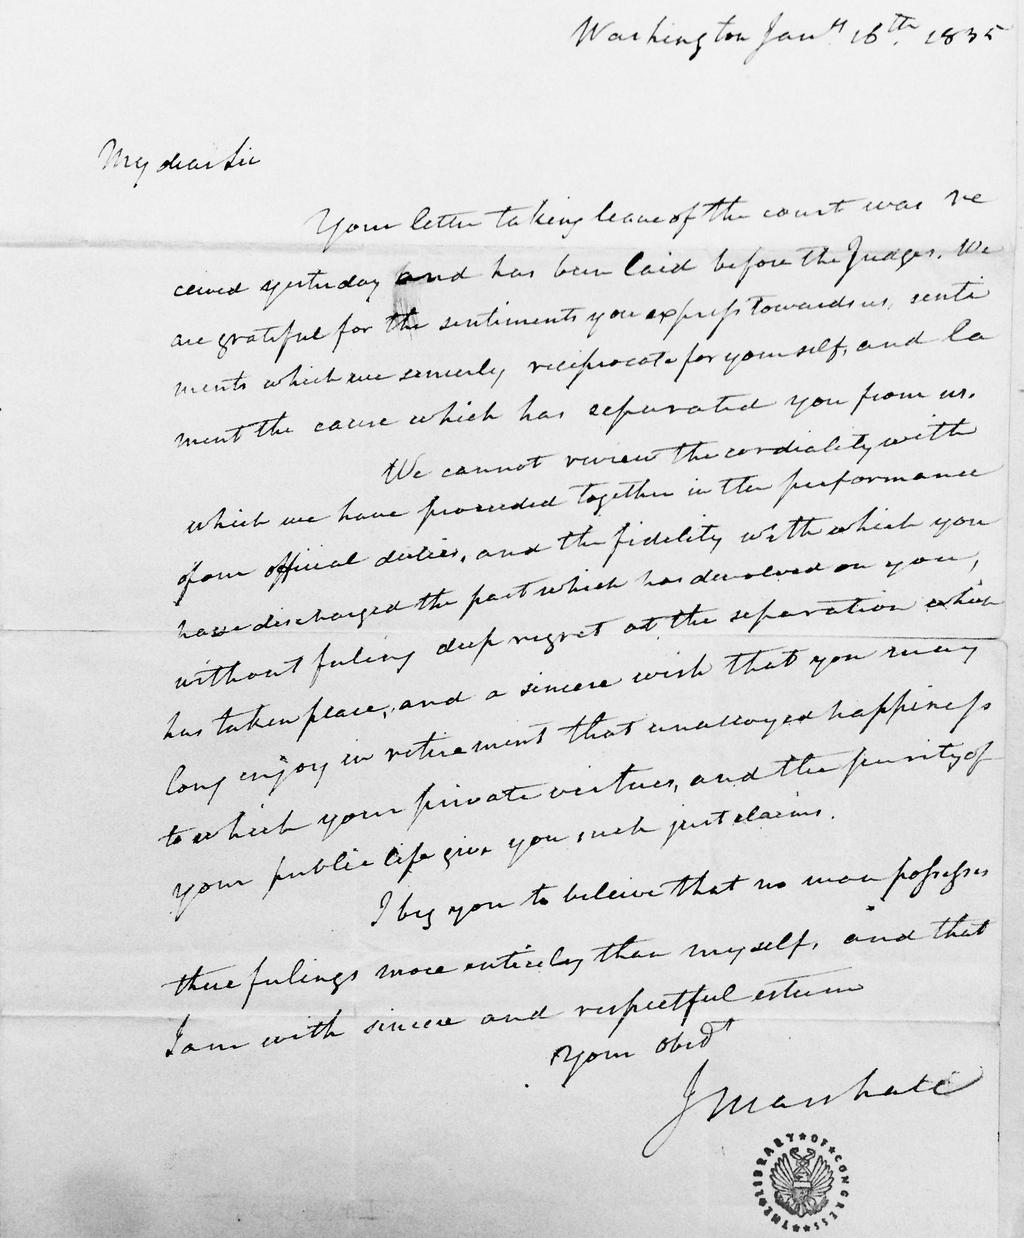 ROSS E. DAVIES Washington Jany. 16th. 1835 My dear Sir Your letter taking leave of the Court was received yesterday and has been laid before the Judges.